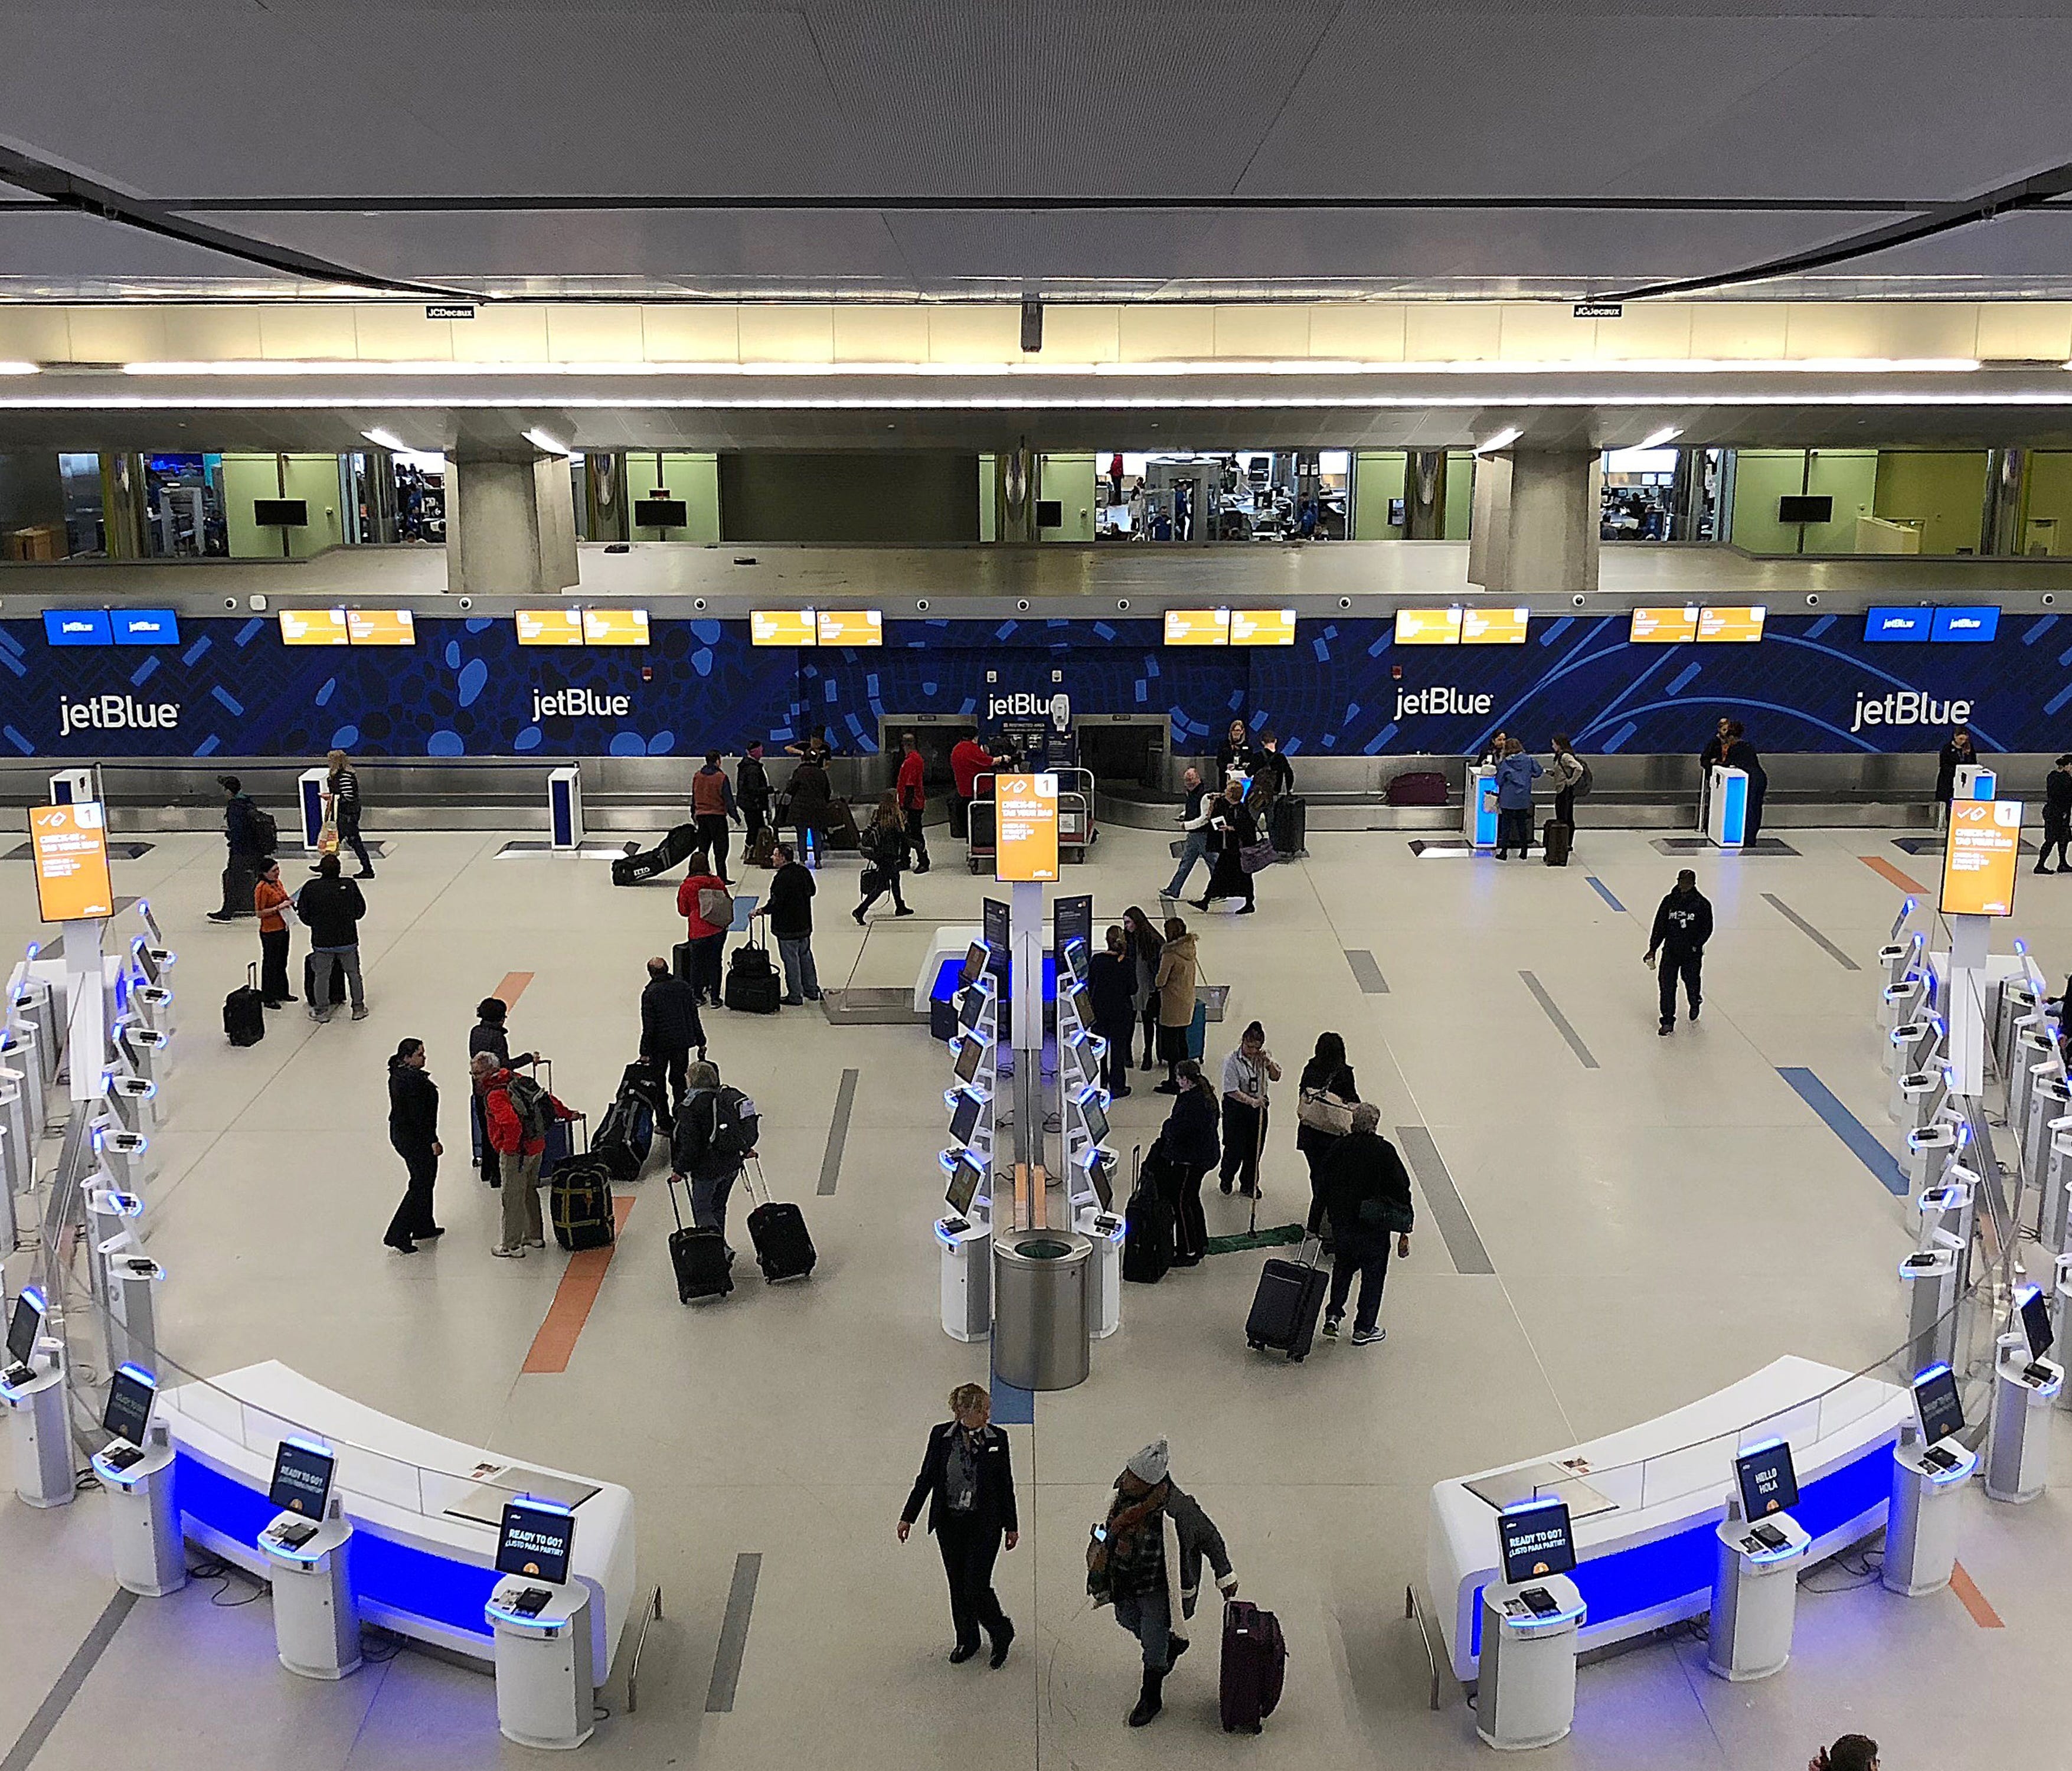 Passengers arrive at the JetBlue Airways' self-service lobby in Terminal C at Logan Airport in Boston on March 22, 2018.